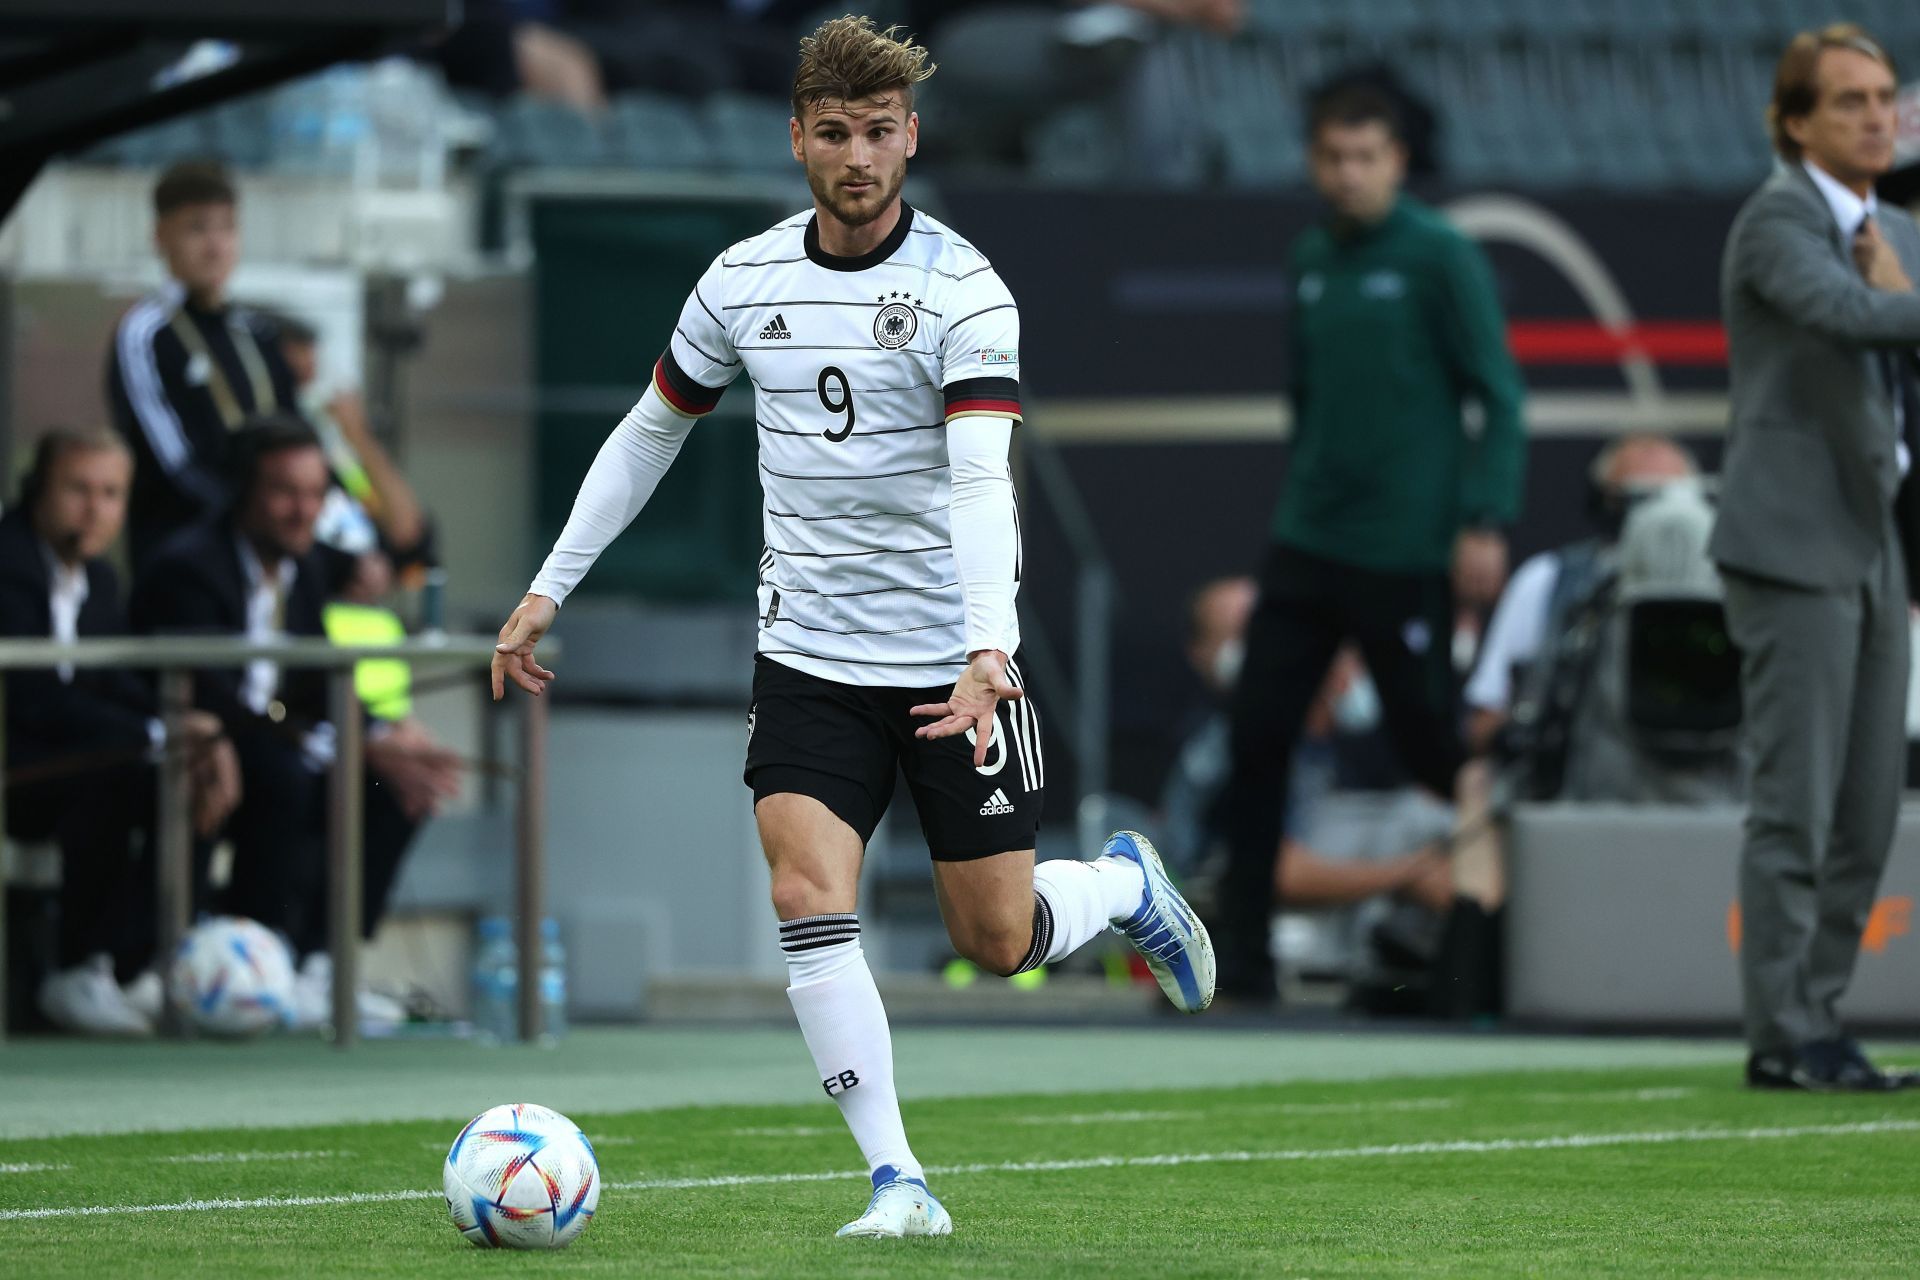 Timo Werner could return to RB Leipzig this summer.